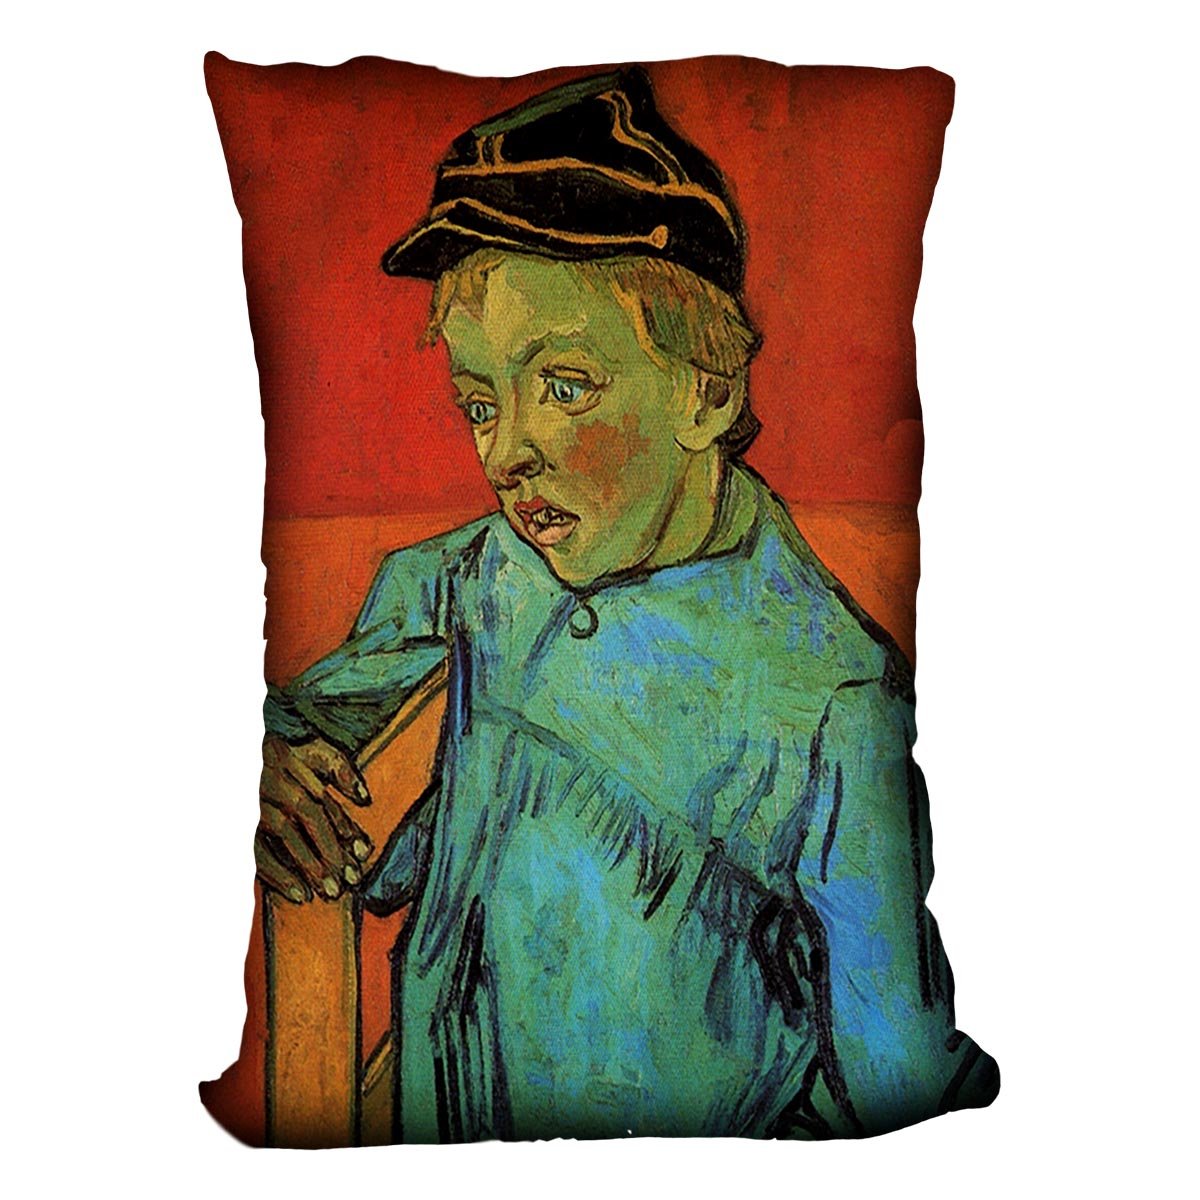 The Schoolboy Camille Roulin by Van Gogh Throw Pillow